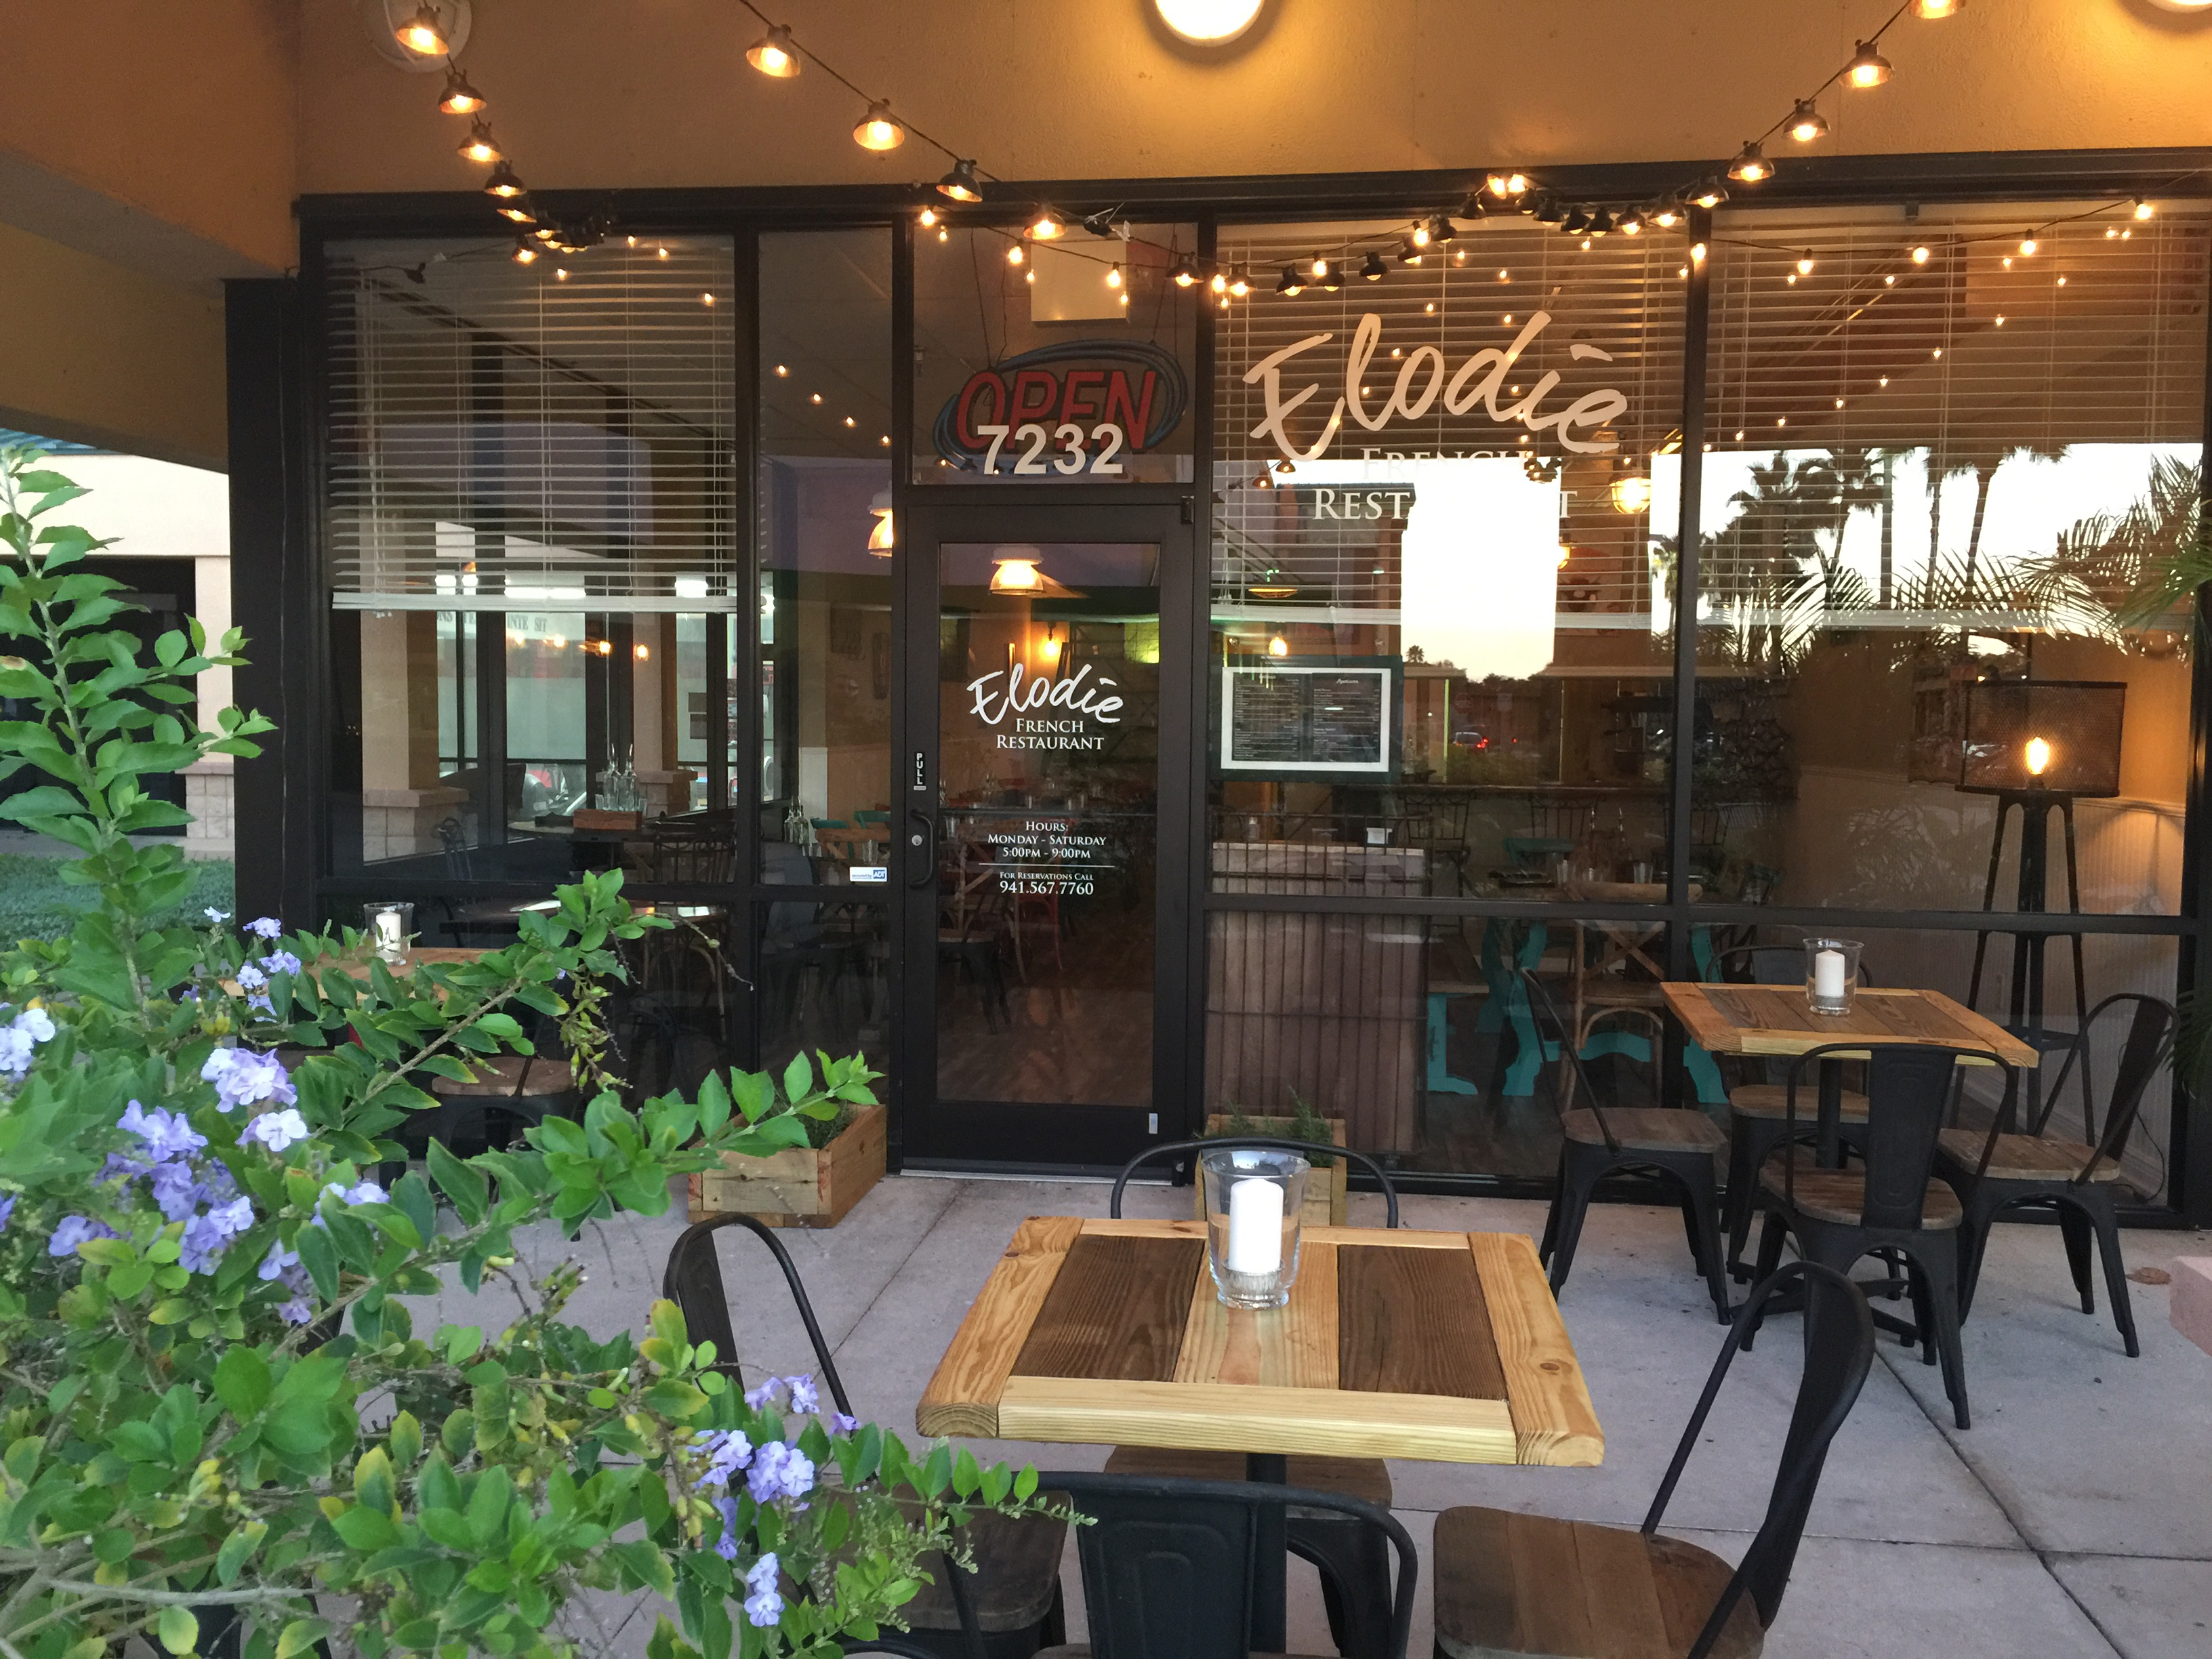 Elodie French Restaurant — French Food from Provence